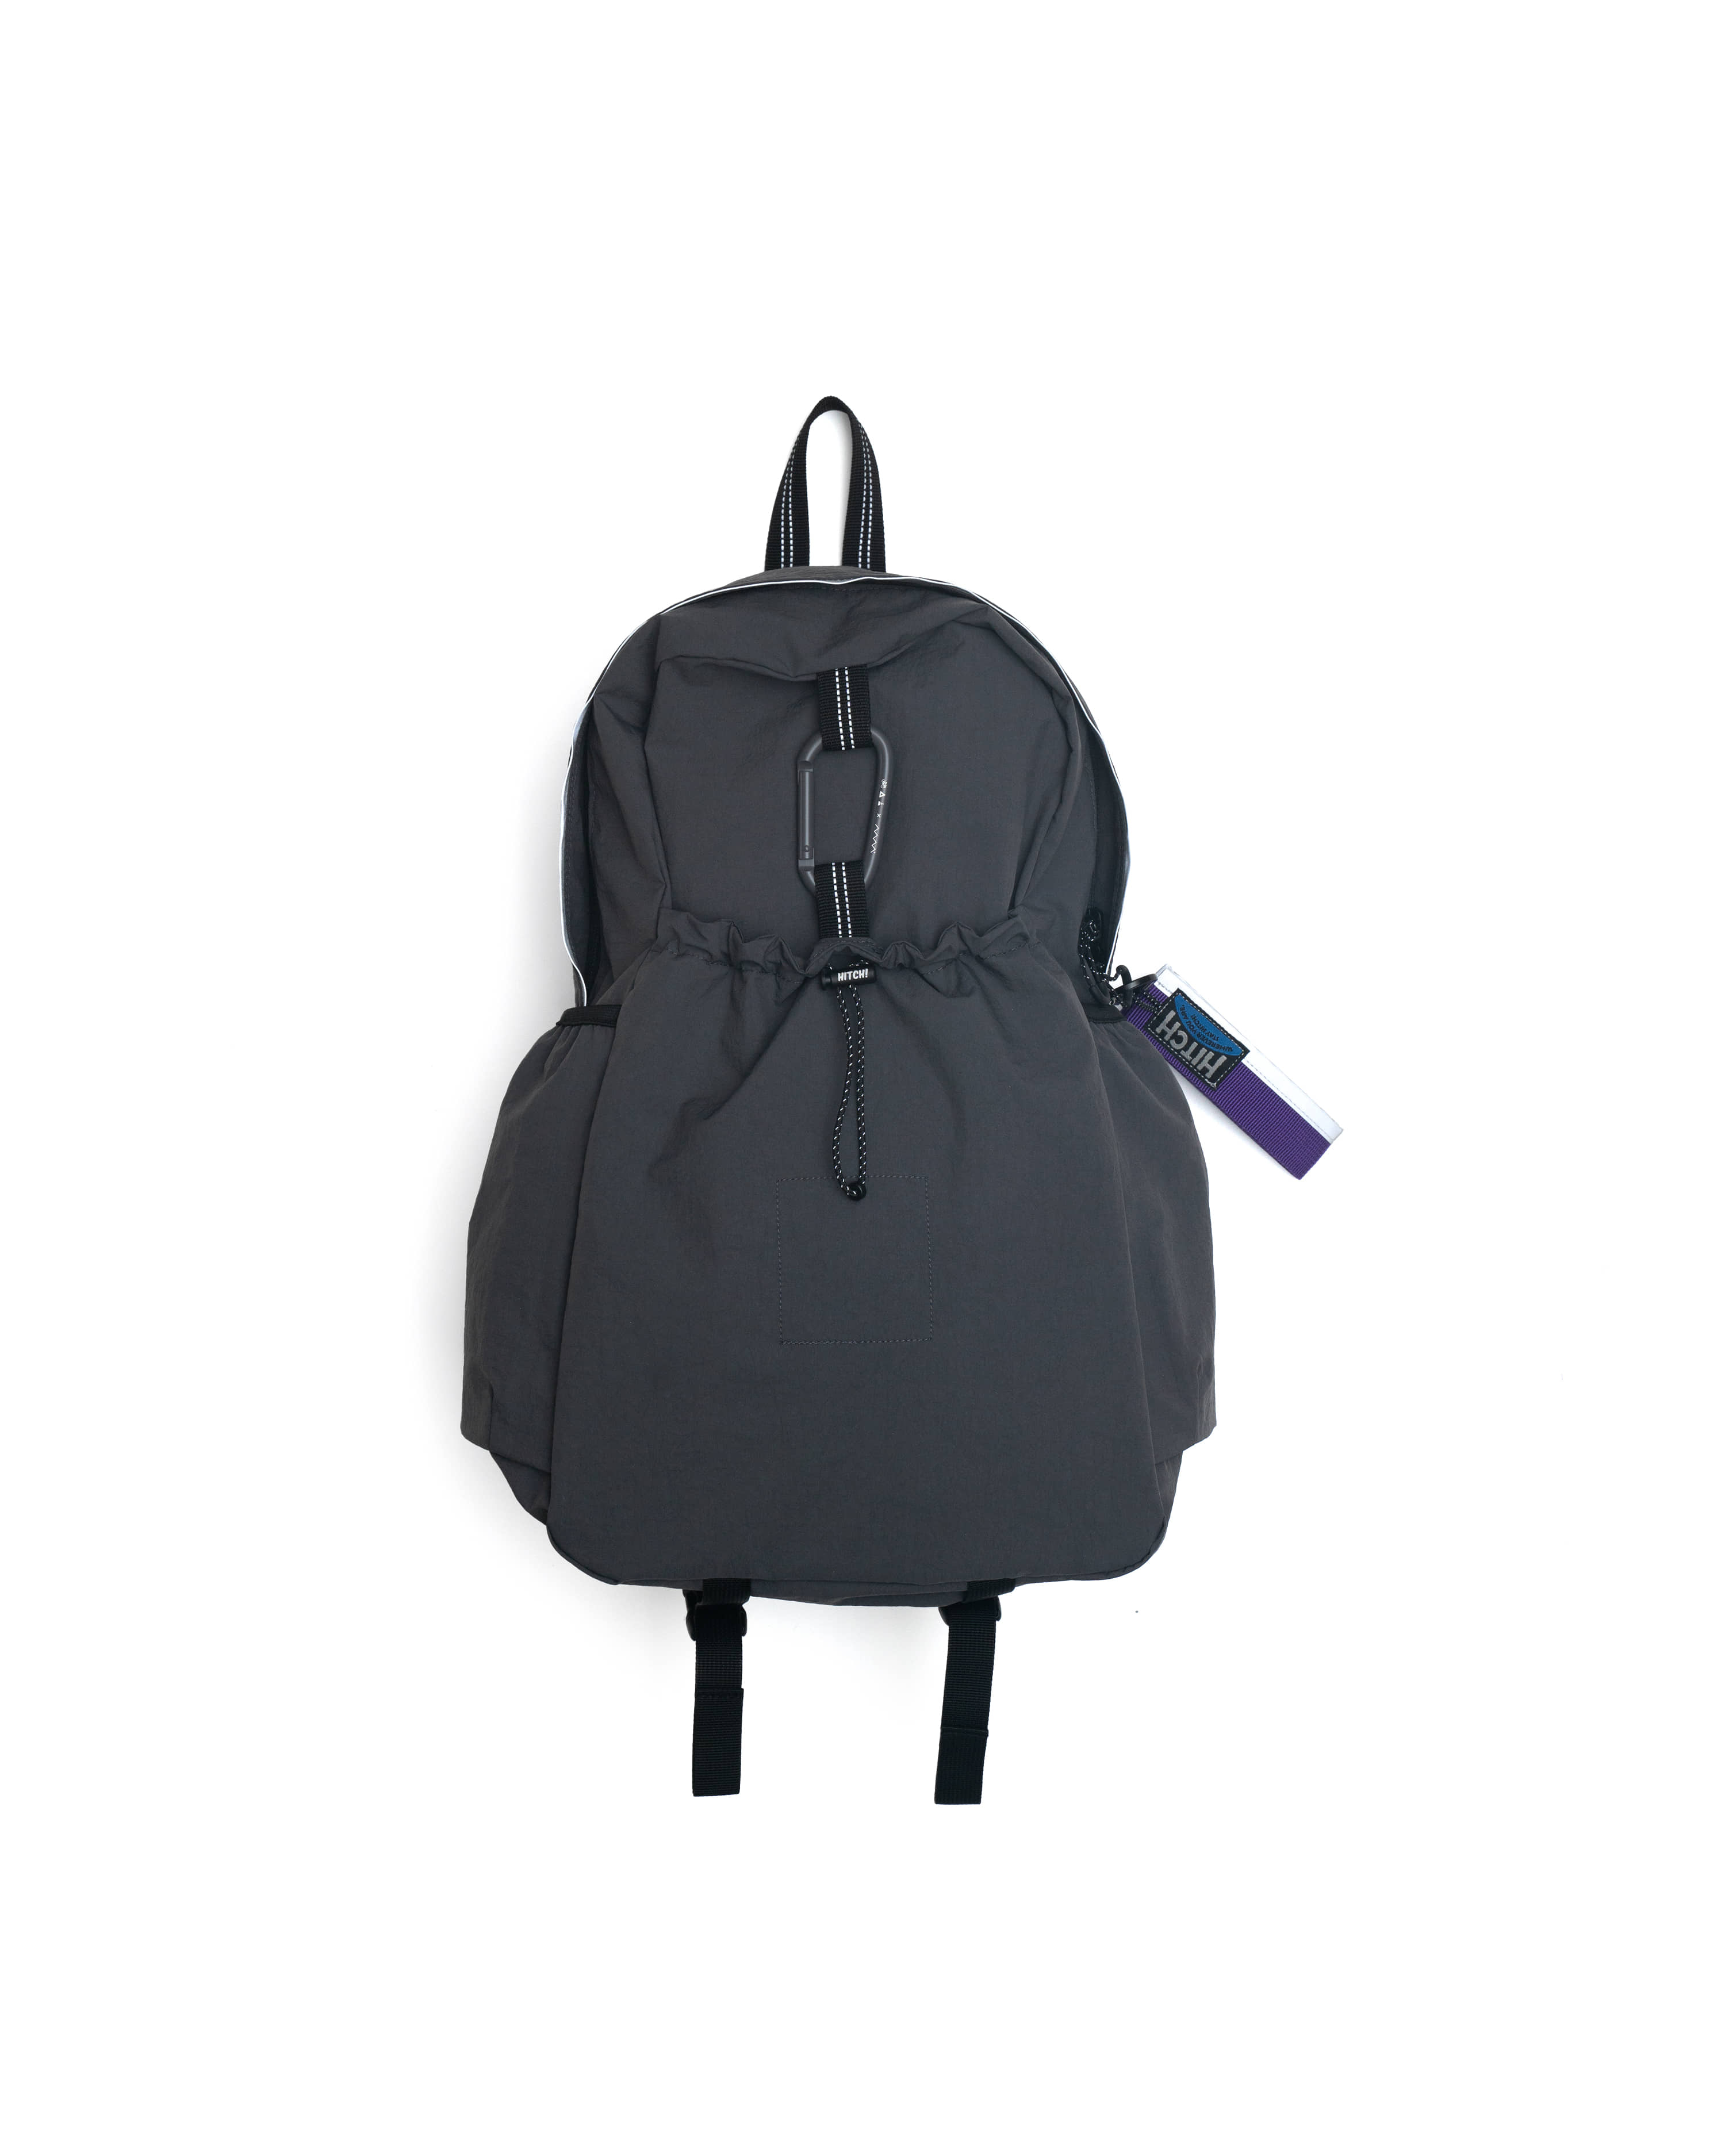 [2nd Restock] HITCH x mmo Backpack (085) - Charcoal